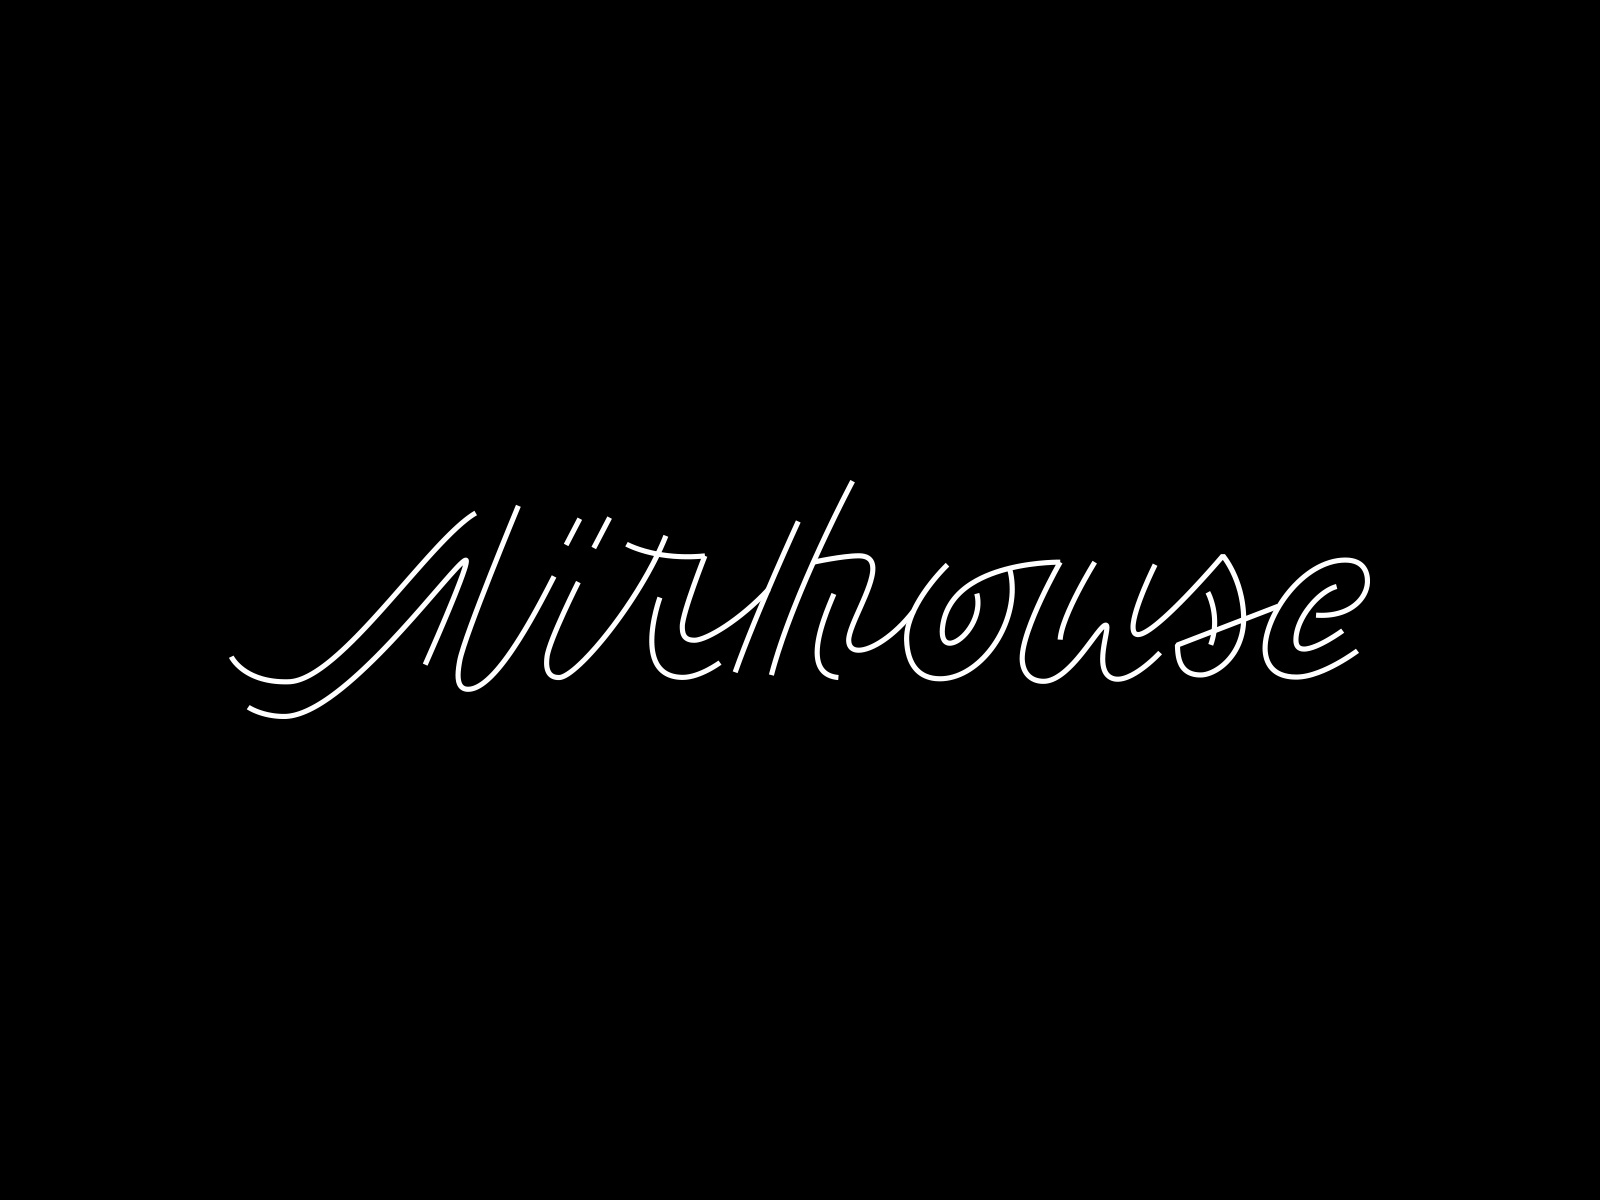 Airhouse Duo by Chase Turberville for Focus Lab on Dribbble